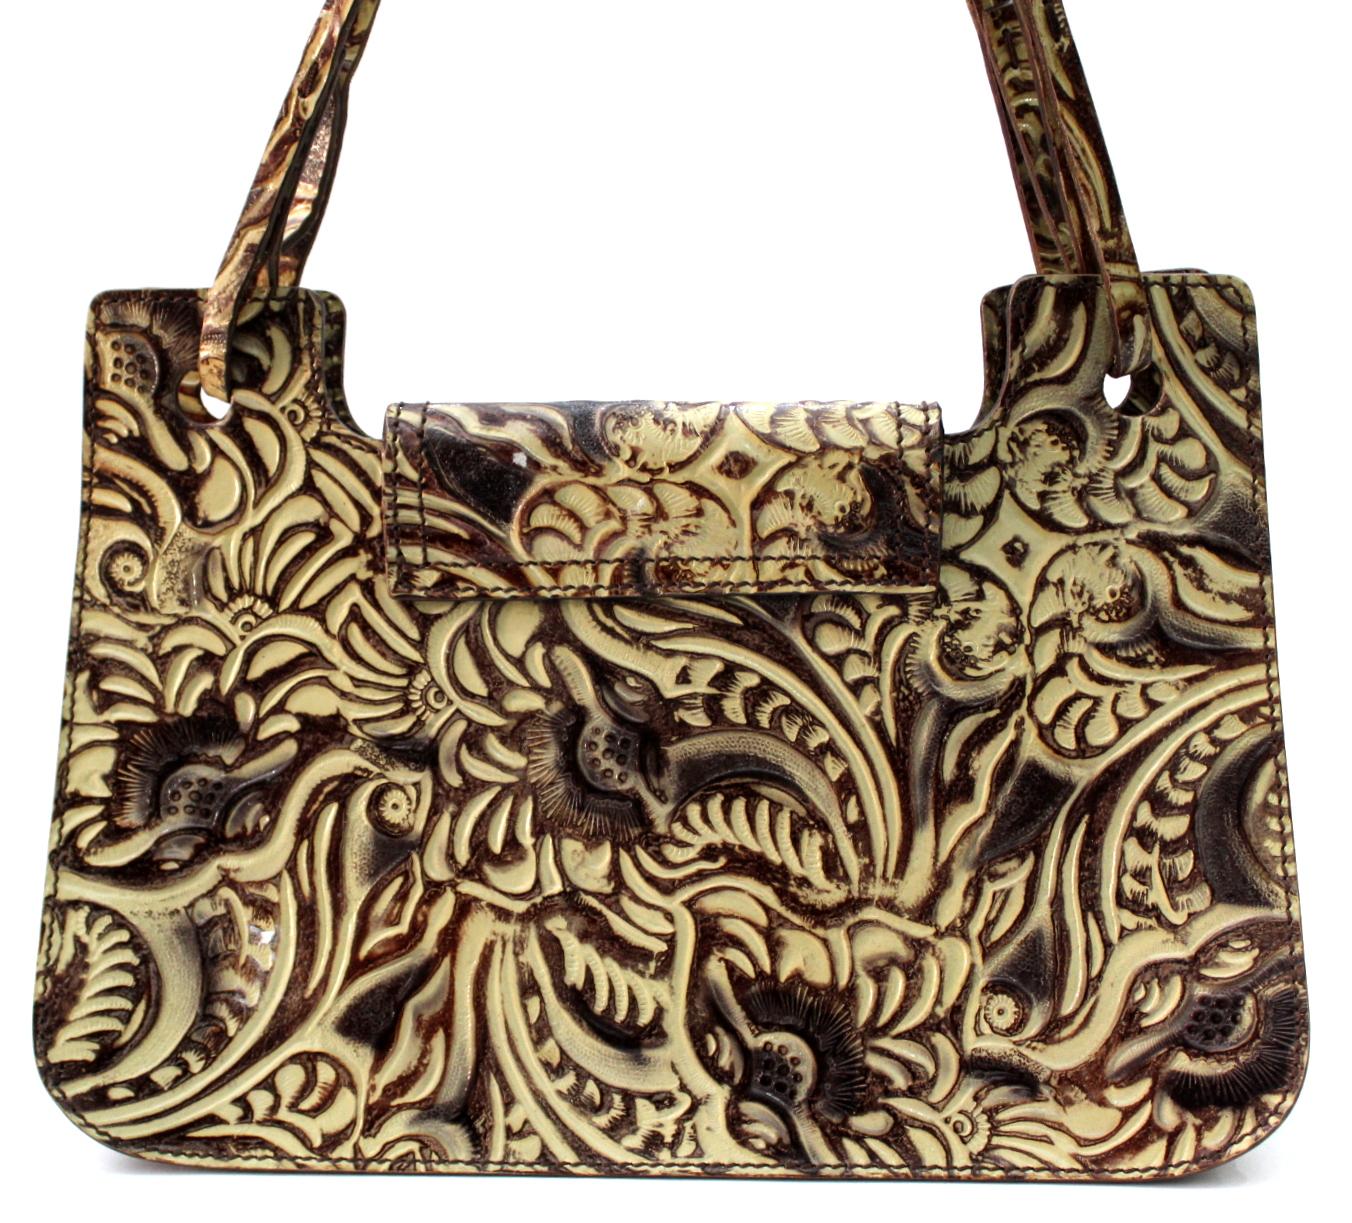 Fendi natural leather embossed bag with floral pattern . The interior is lined with green silk with a slit pocket.
Limited series. In very good condition.